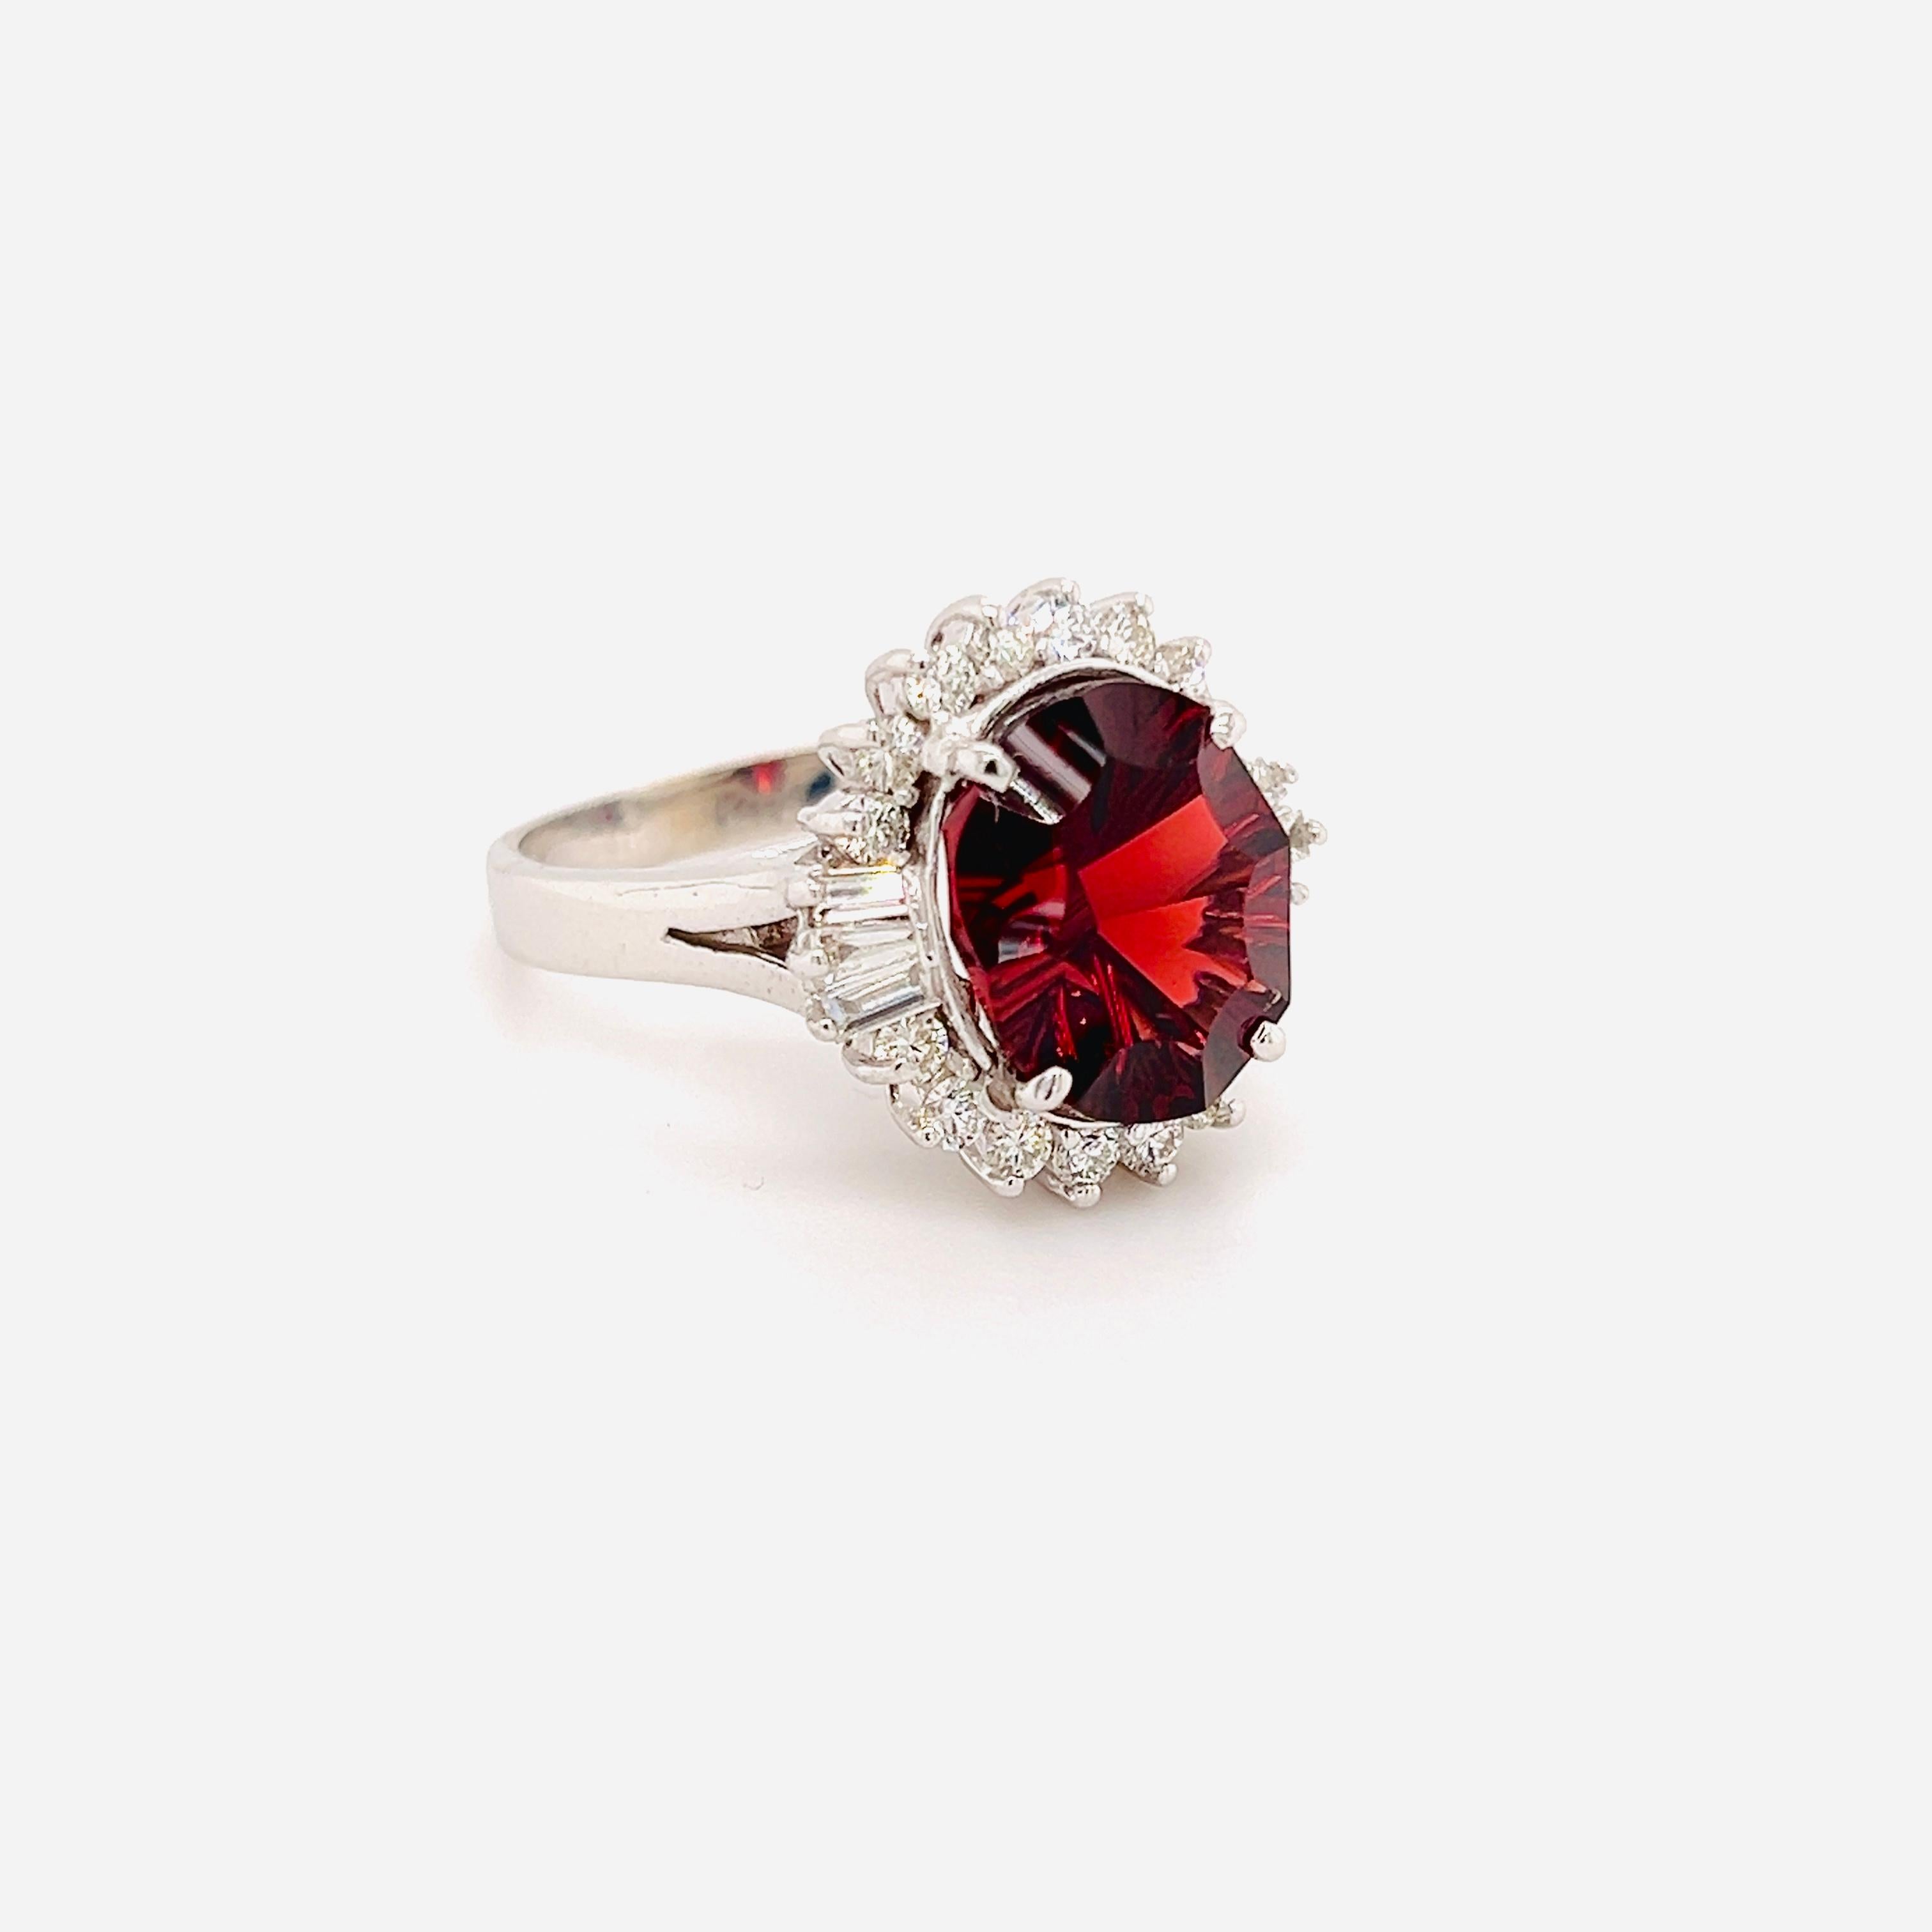 14K White Gold and Diamond Ring with Portuguese Cut Oval Garnet Center

Apprx. 7 carat Portuguese cut, Oval Garnet center

Apprx. 0.70ct. G color VS clarity round and baguette cut diamonds

Ring is a size 7, sizable by request